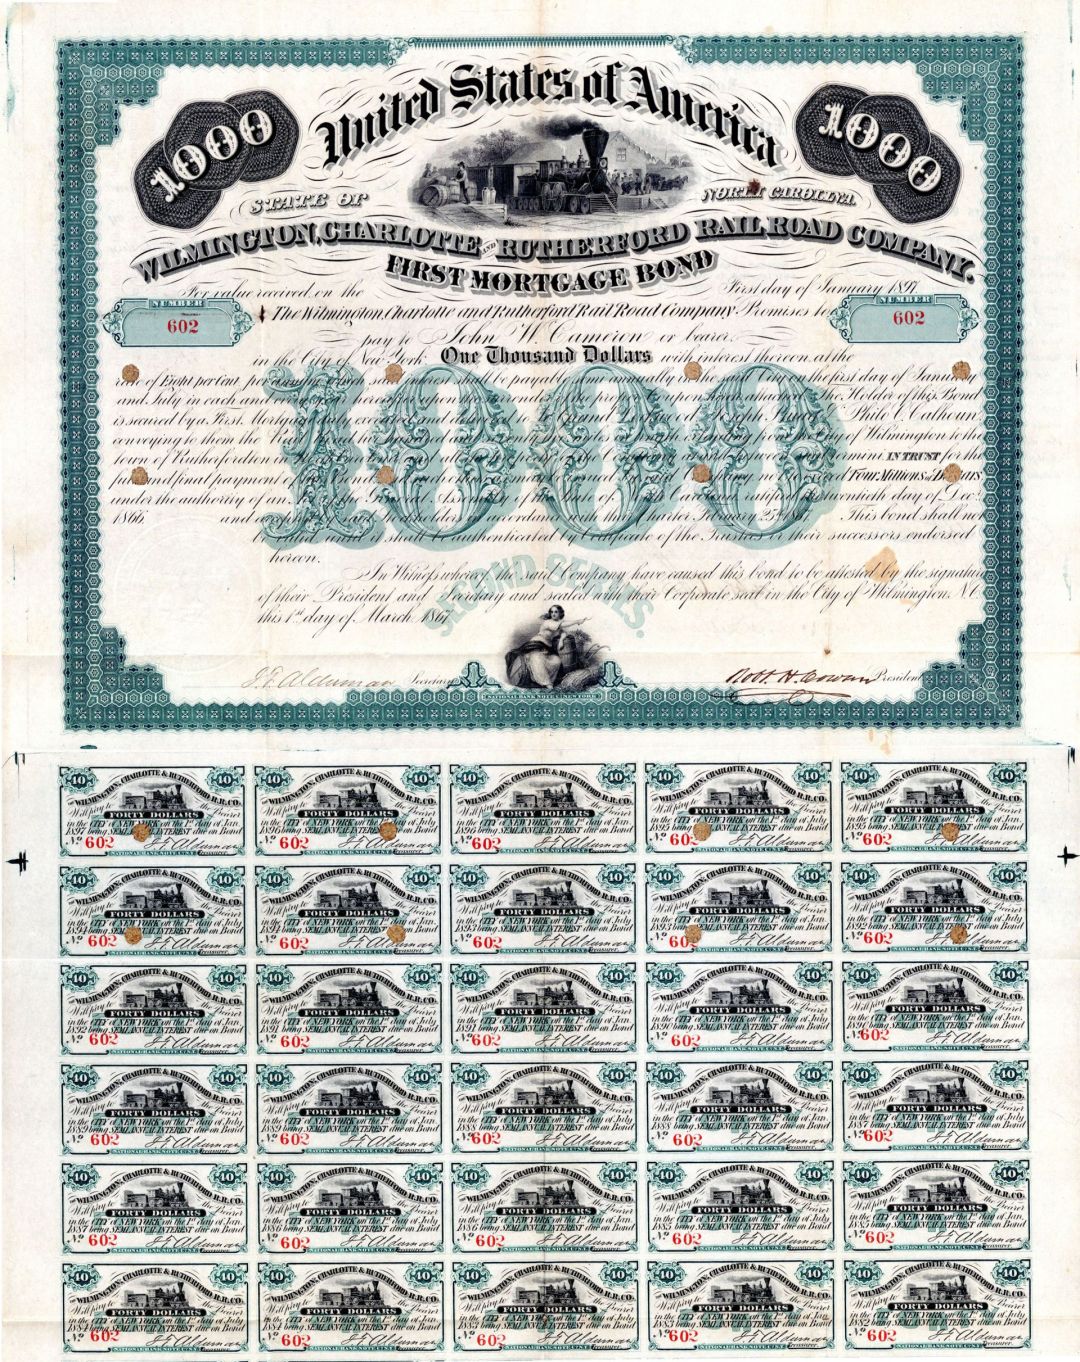 Wilmington, Charlotte and Rutherford Railroad Co. - 1867 dated $1,000 Bond